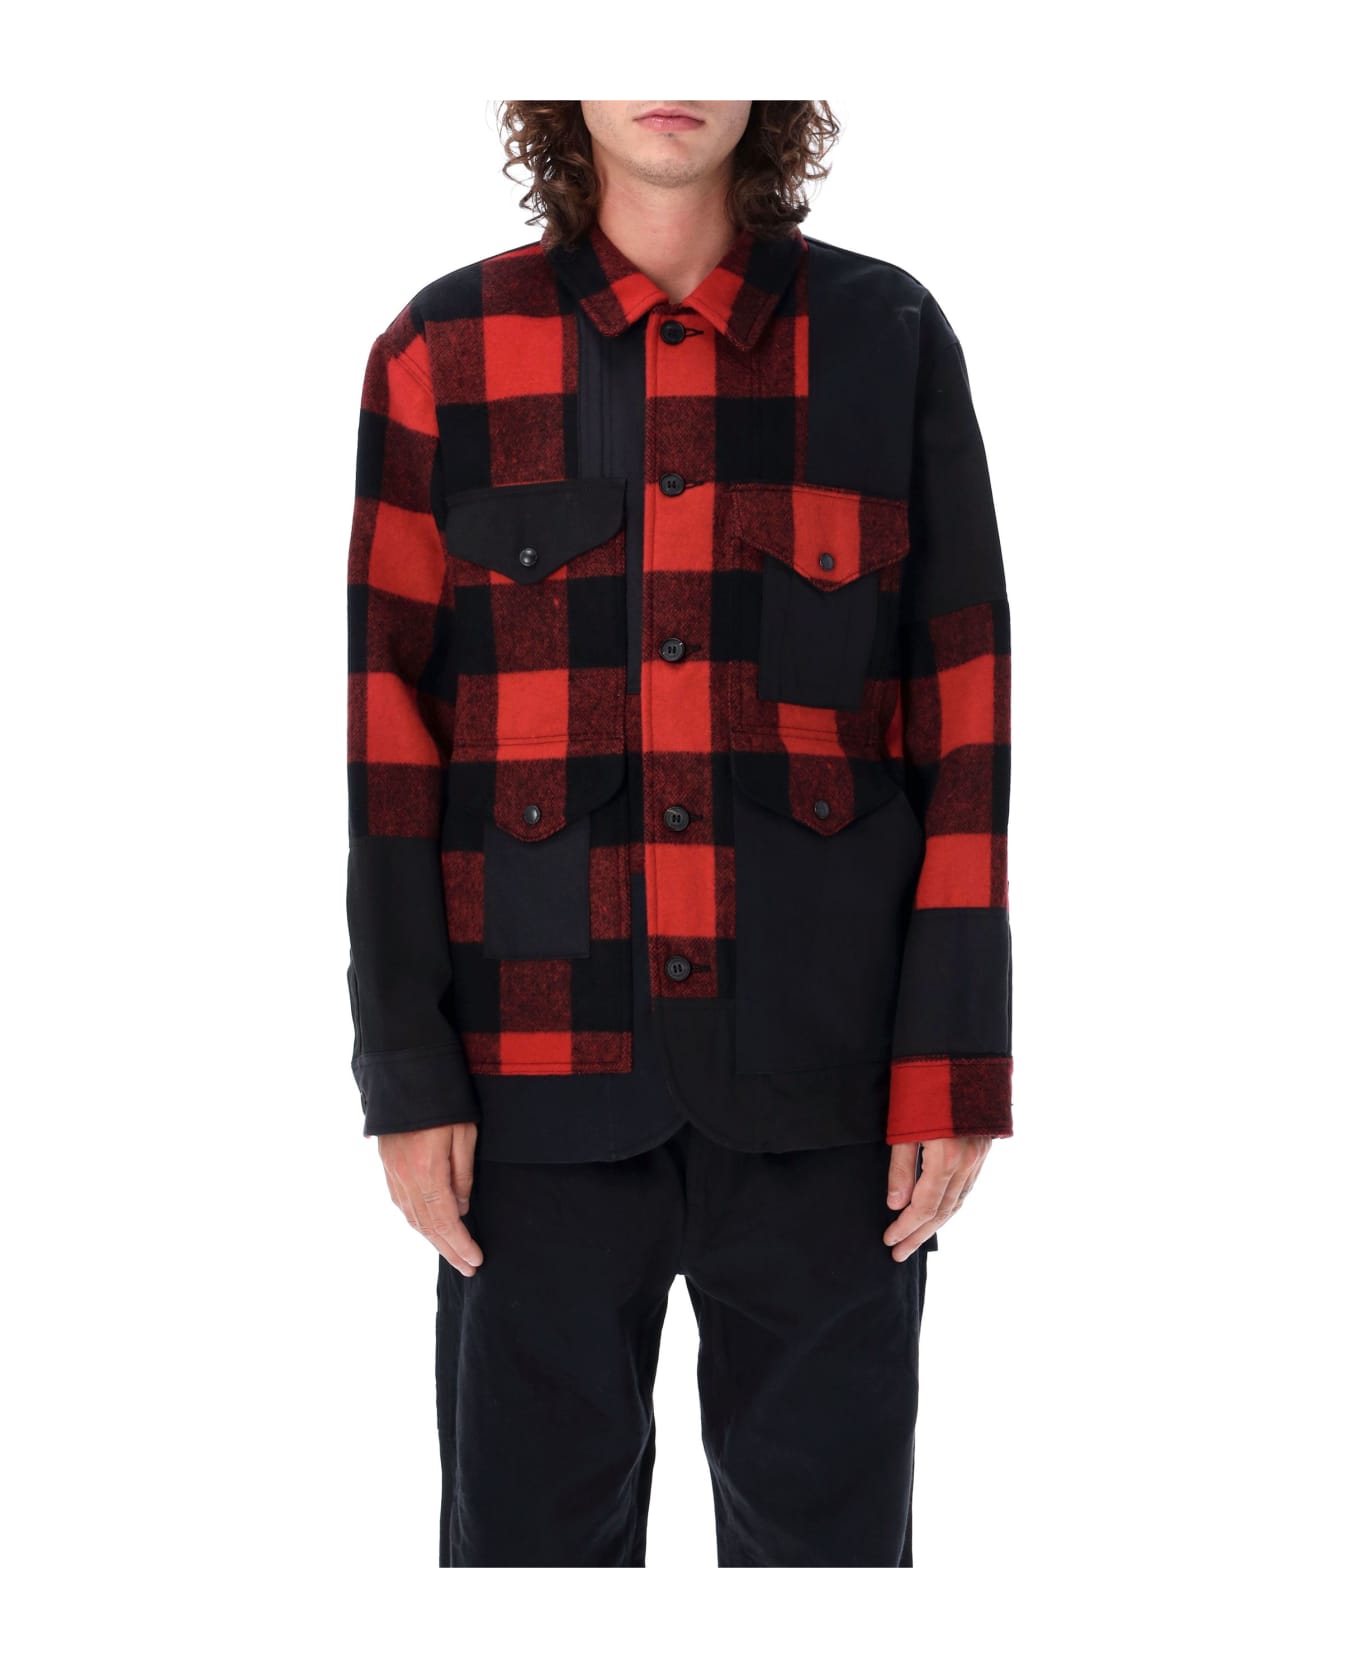 Comme des Garçons Homme Shirt Jacket Check Red - RED CHECK